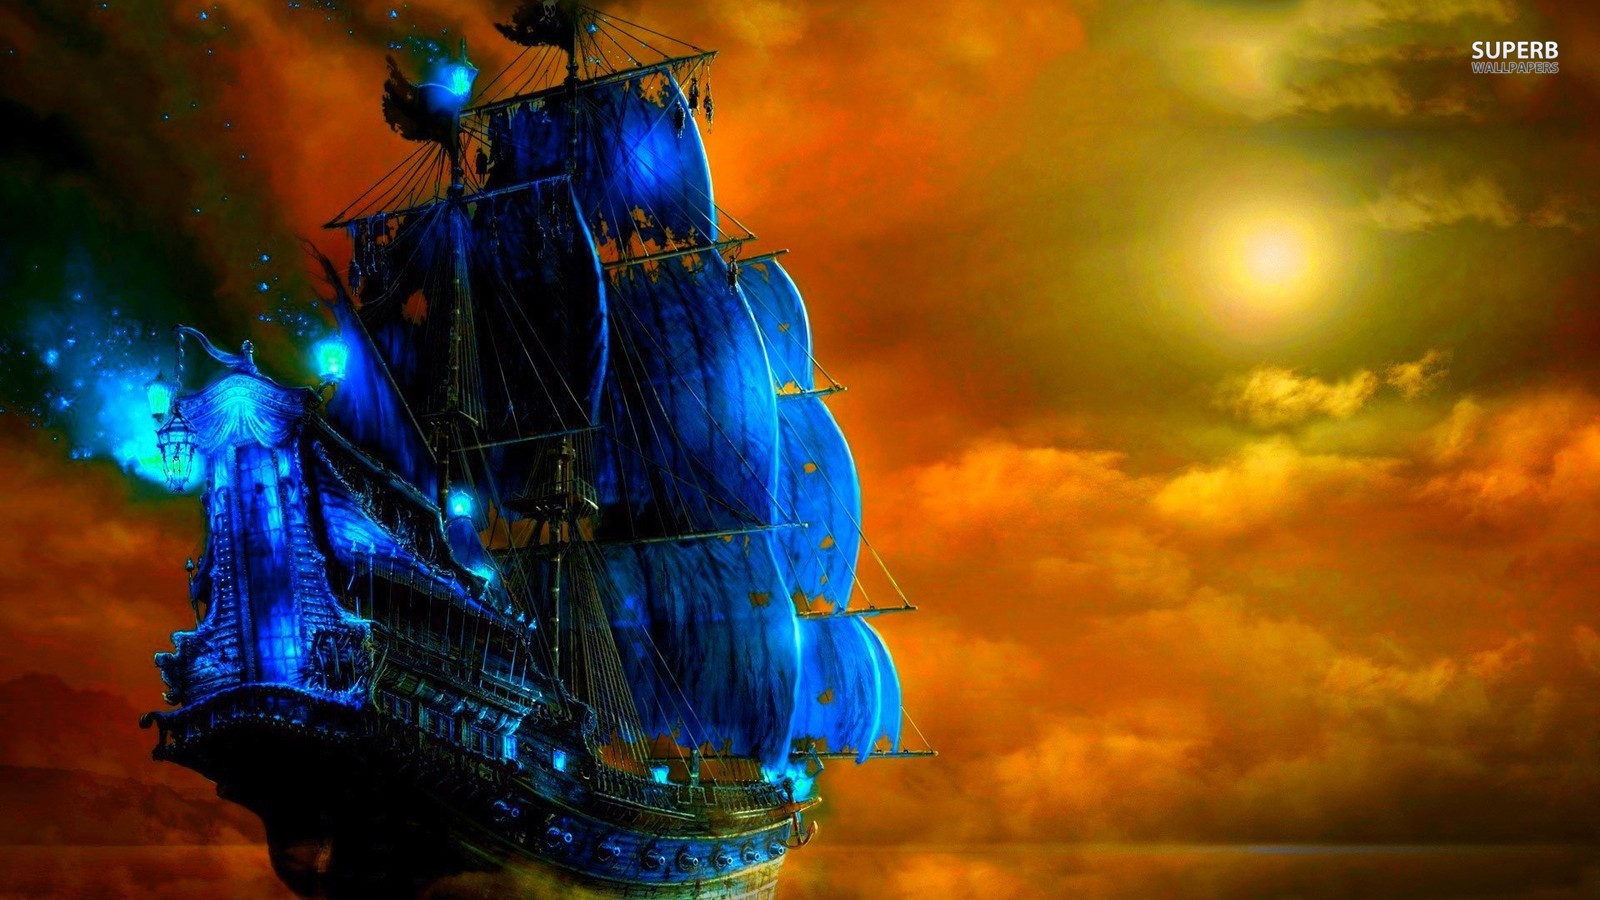 Pirates Image Ghost Ship HD Wallpaper And Background Photos